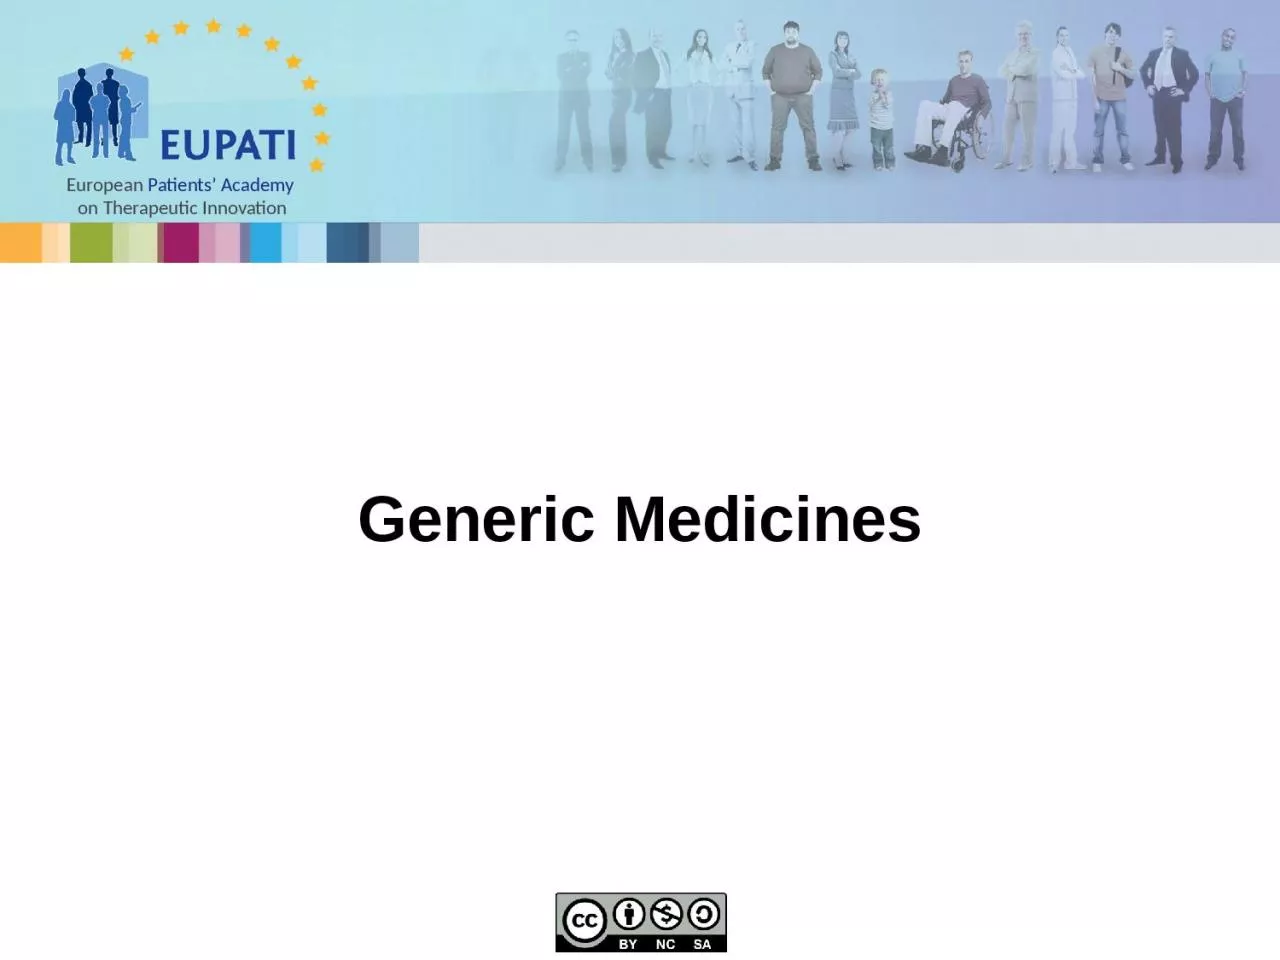 Generic Medicines When chemical medicines are first developed and approved, they are sold